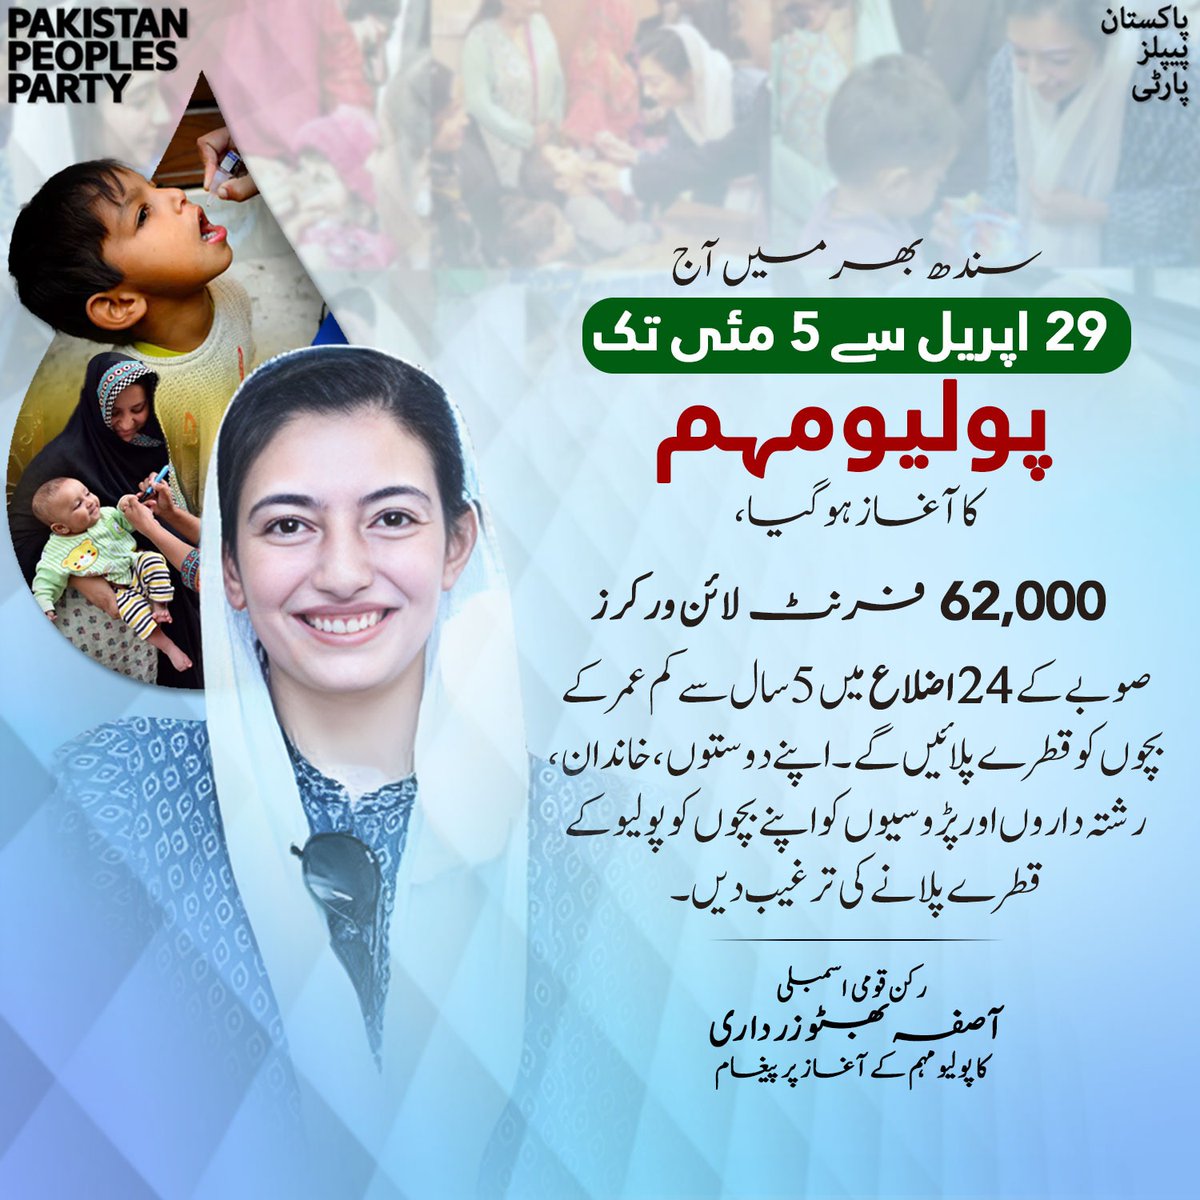 Polio Campaign in all over Sindh from 29th April to 5th May ... A great Incentive taken by Bibi @AseefaBZ Jiye Bhutto ❤️🇱🇾